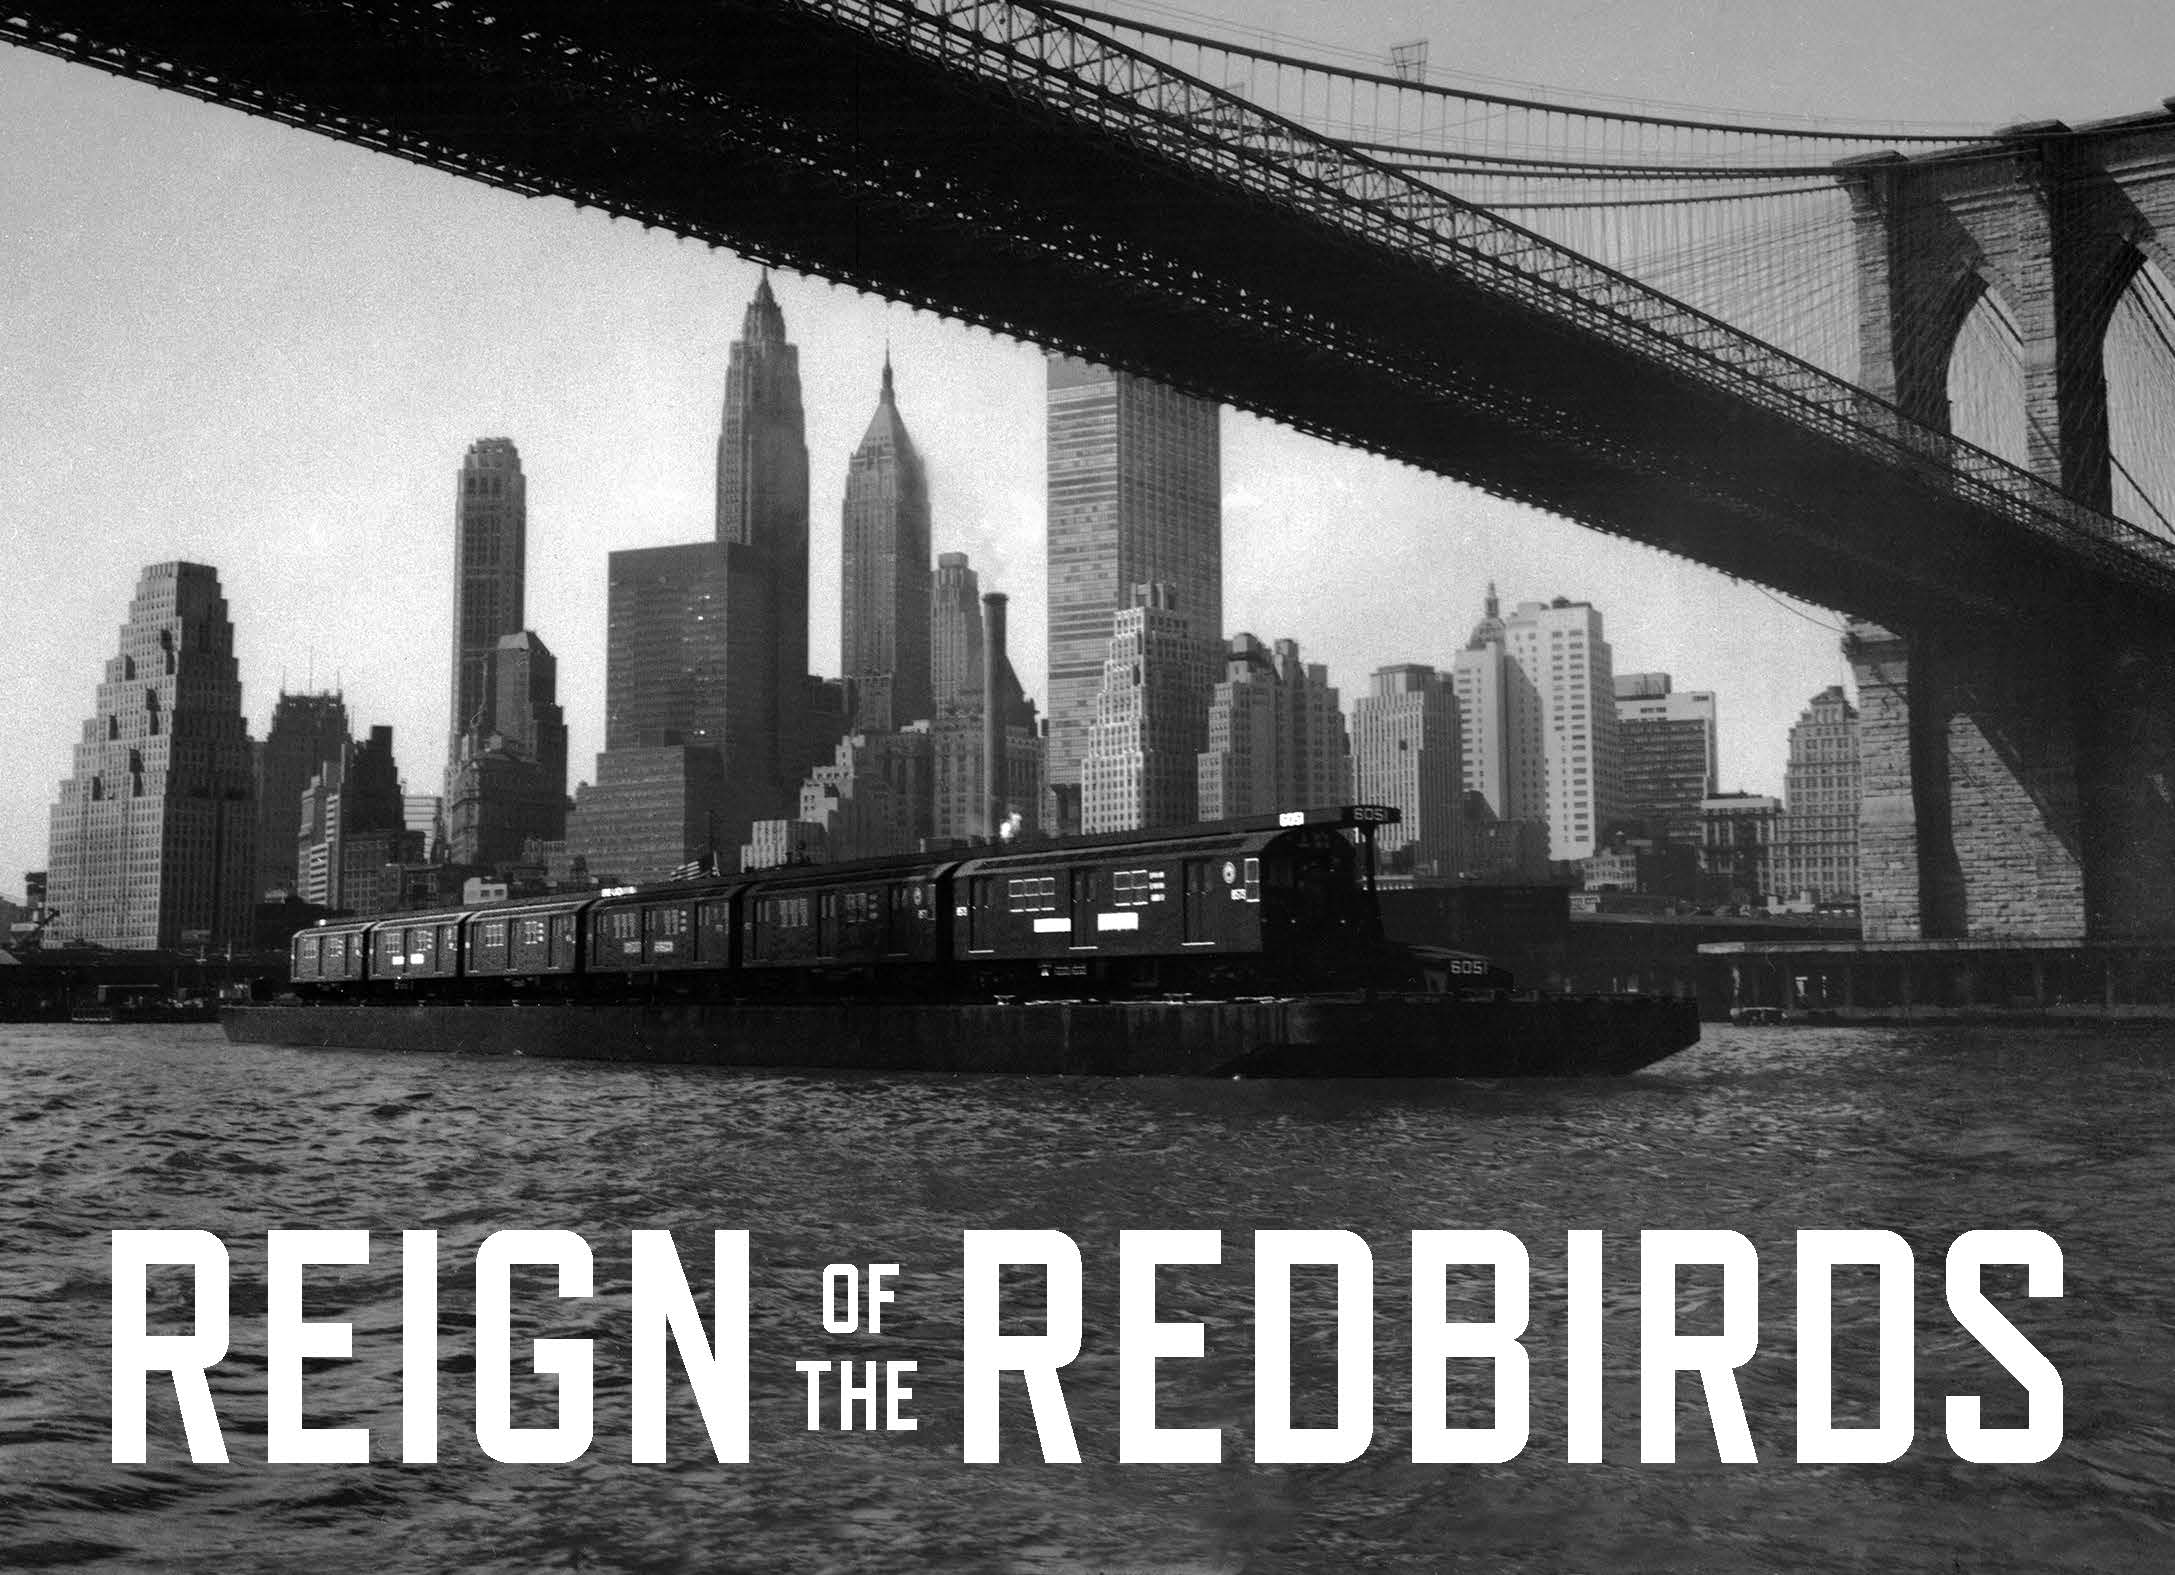 Photo of Redbirds on Barge with Manhattan Skyline and title of exhibit